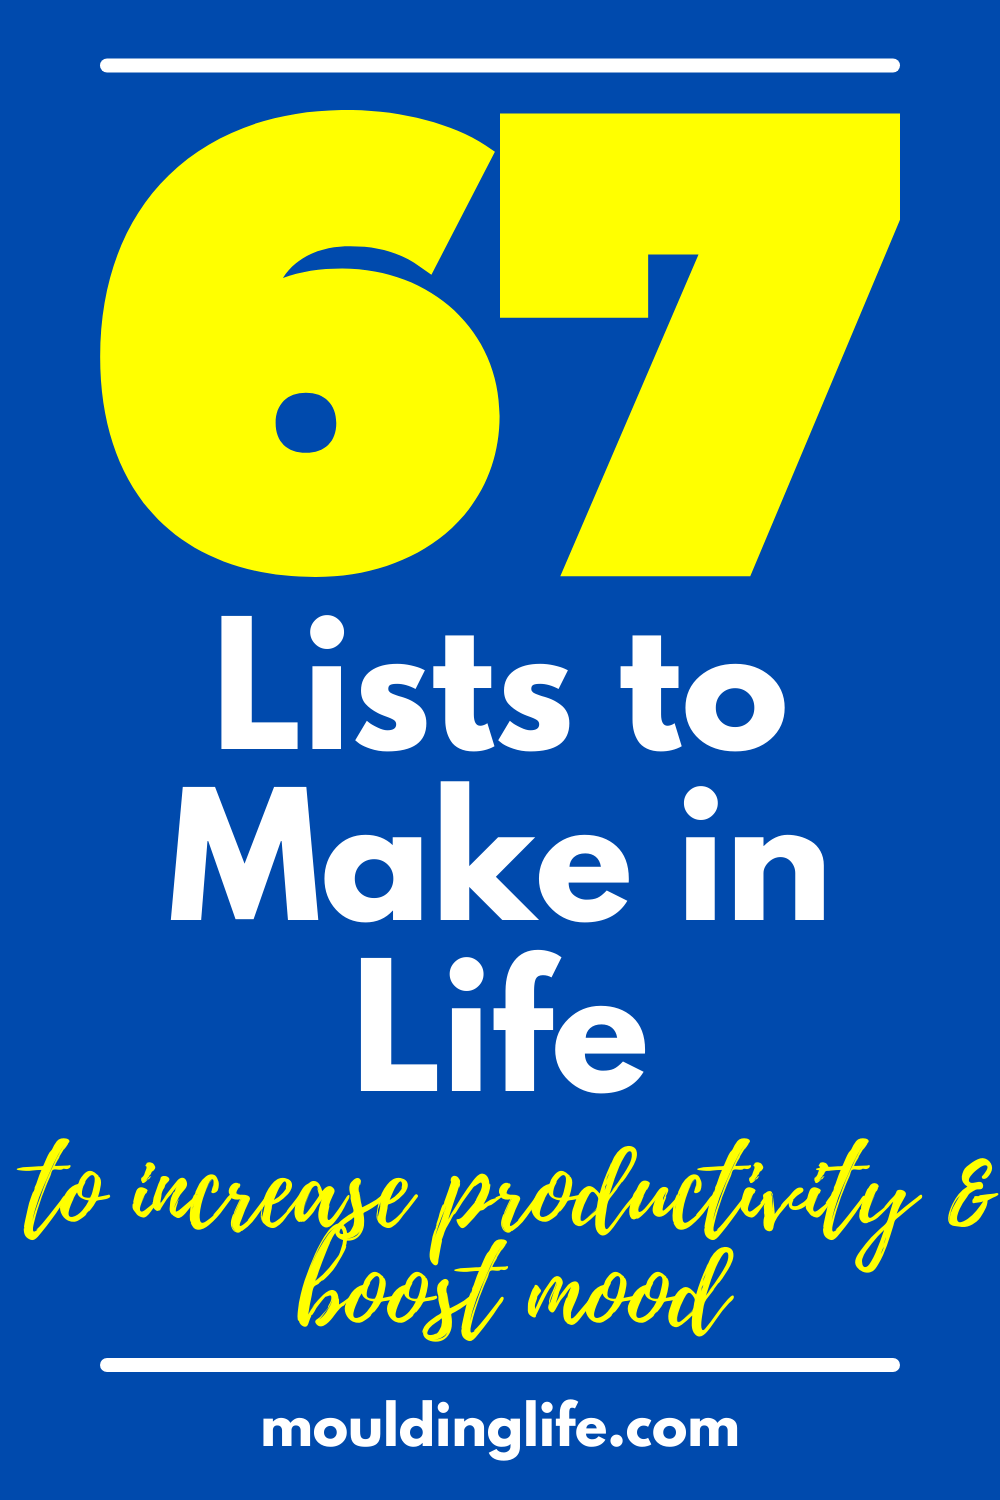 67-lists-to-organize-your-life-and-boost-your-mood-moulding-life